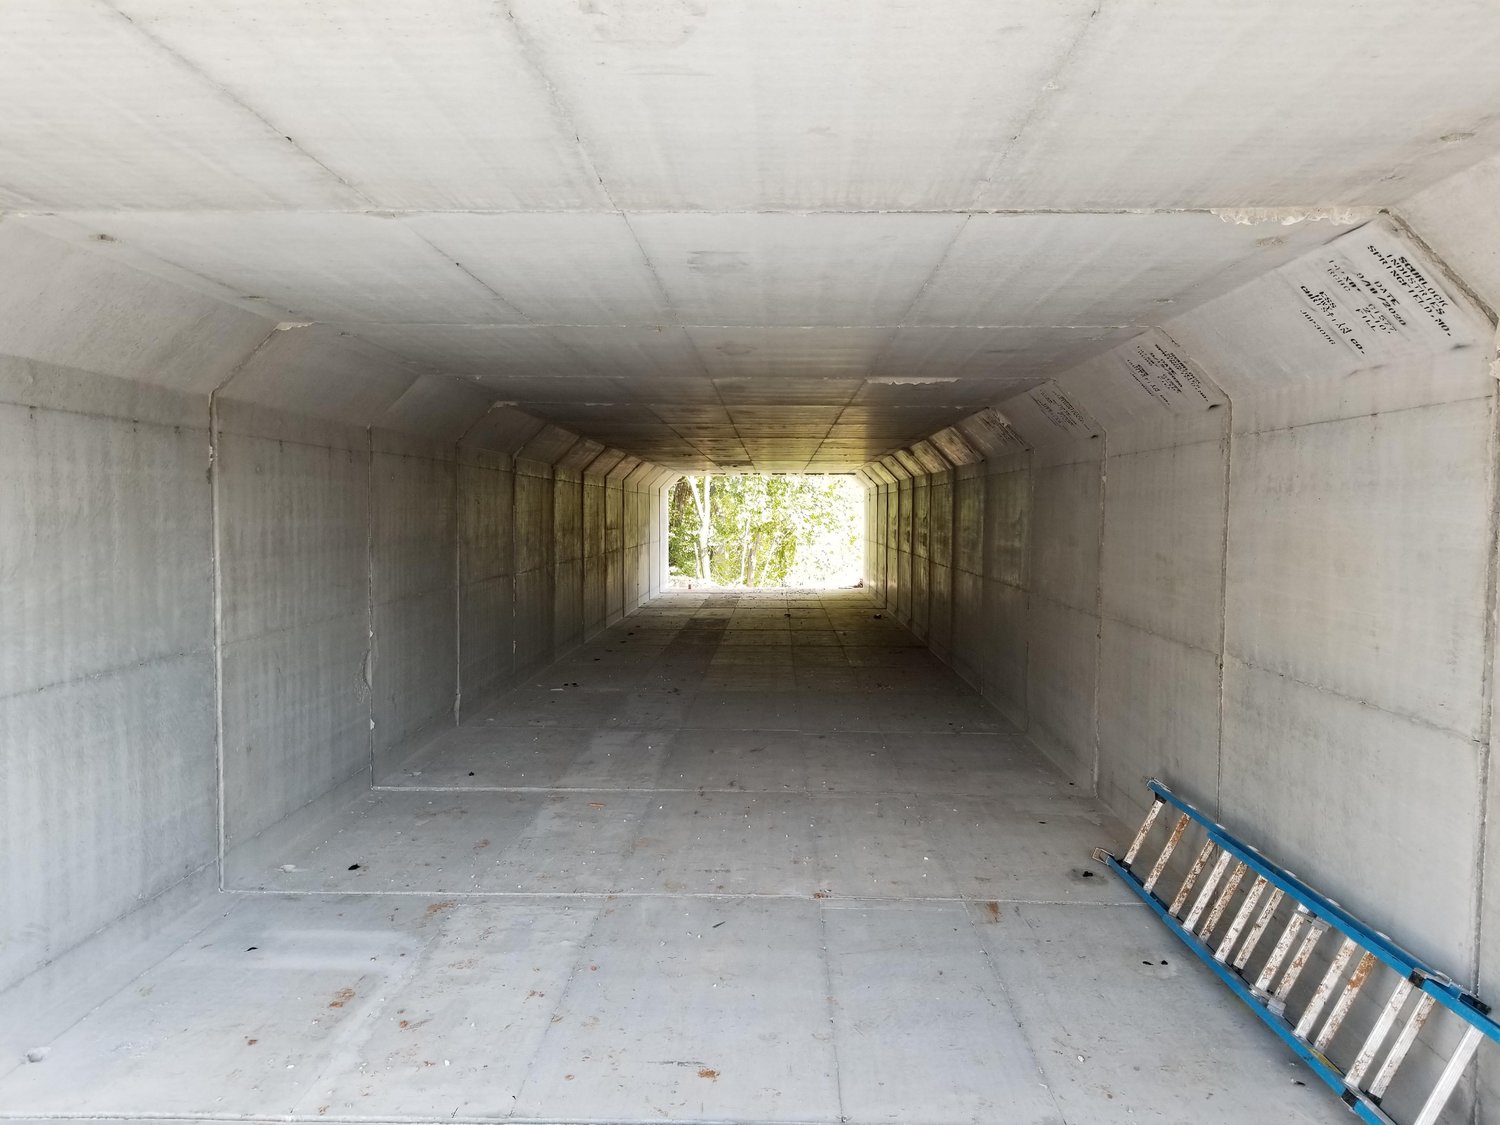 The pedestrian underpass near the Ozark Community Center will connect to the Chadwick Flyer Trail.